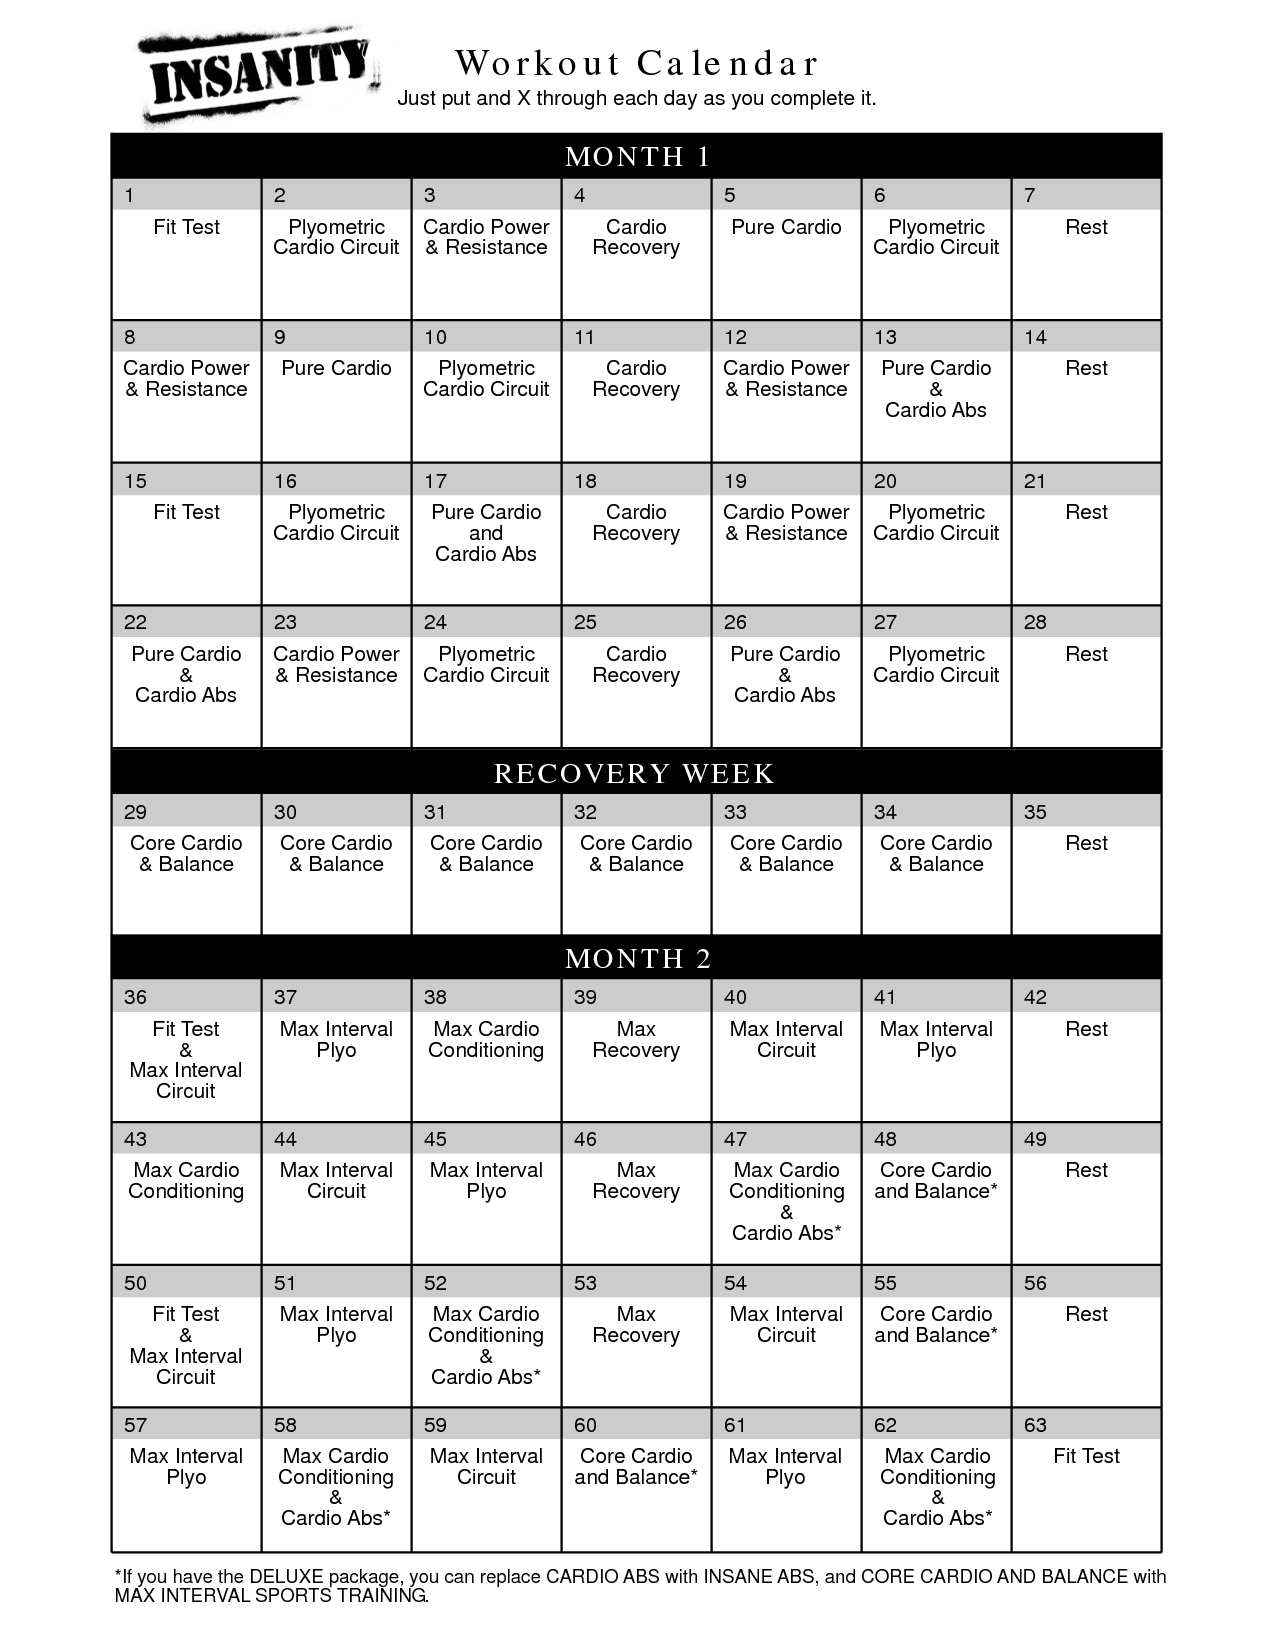 Insanity. 15. Max Interval Sports Training (can Be Used Instead Of Core Cardio And Balance